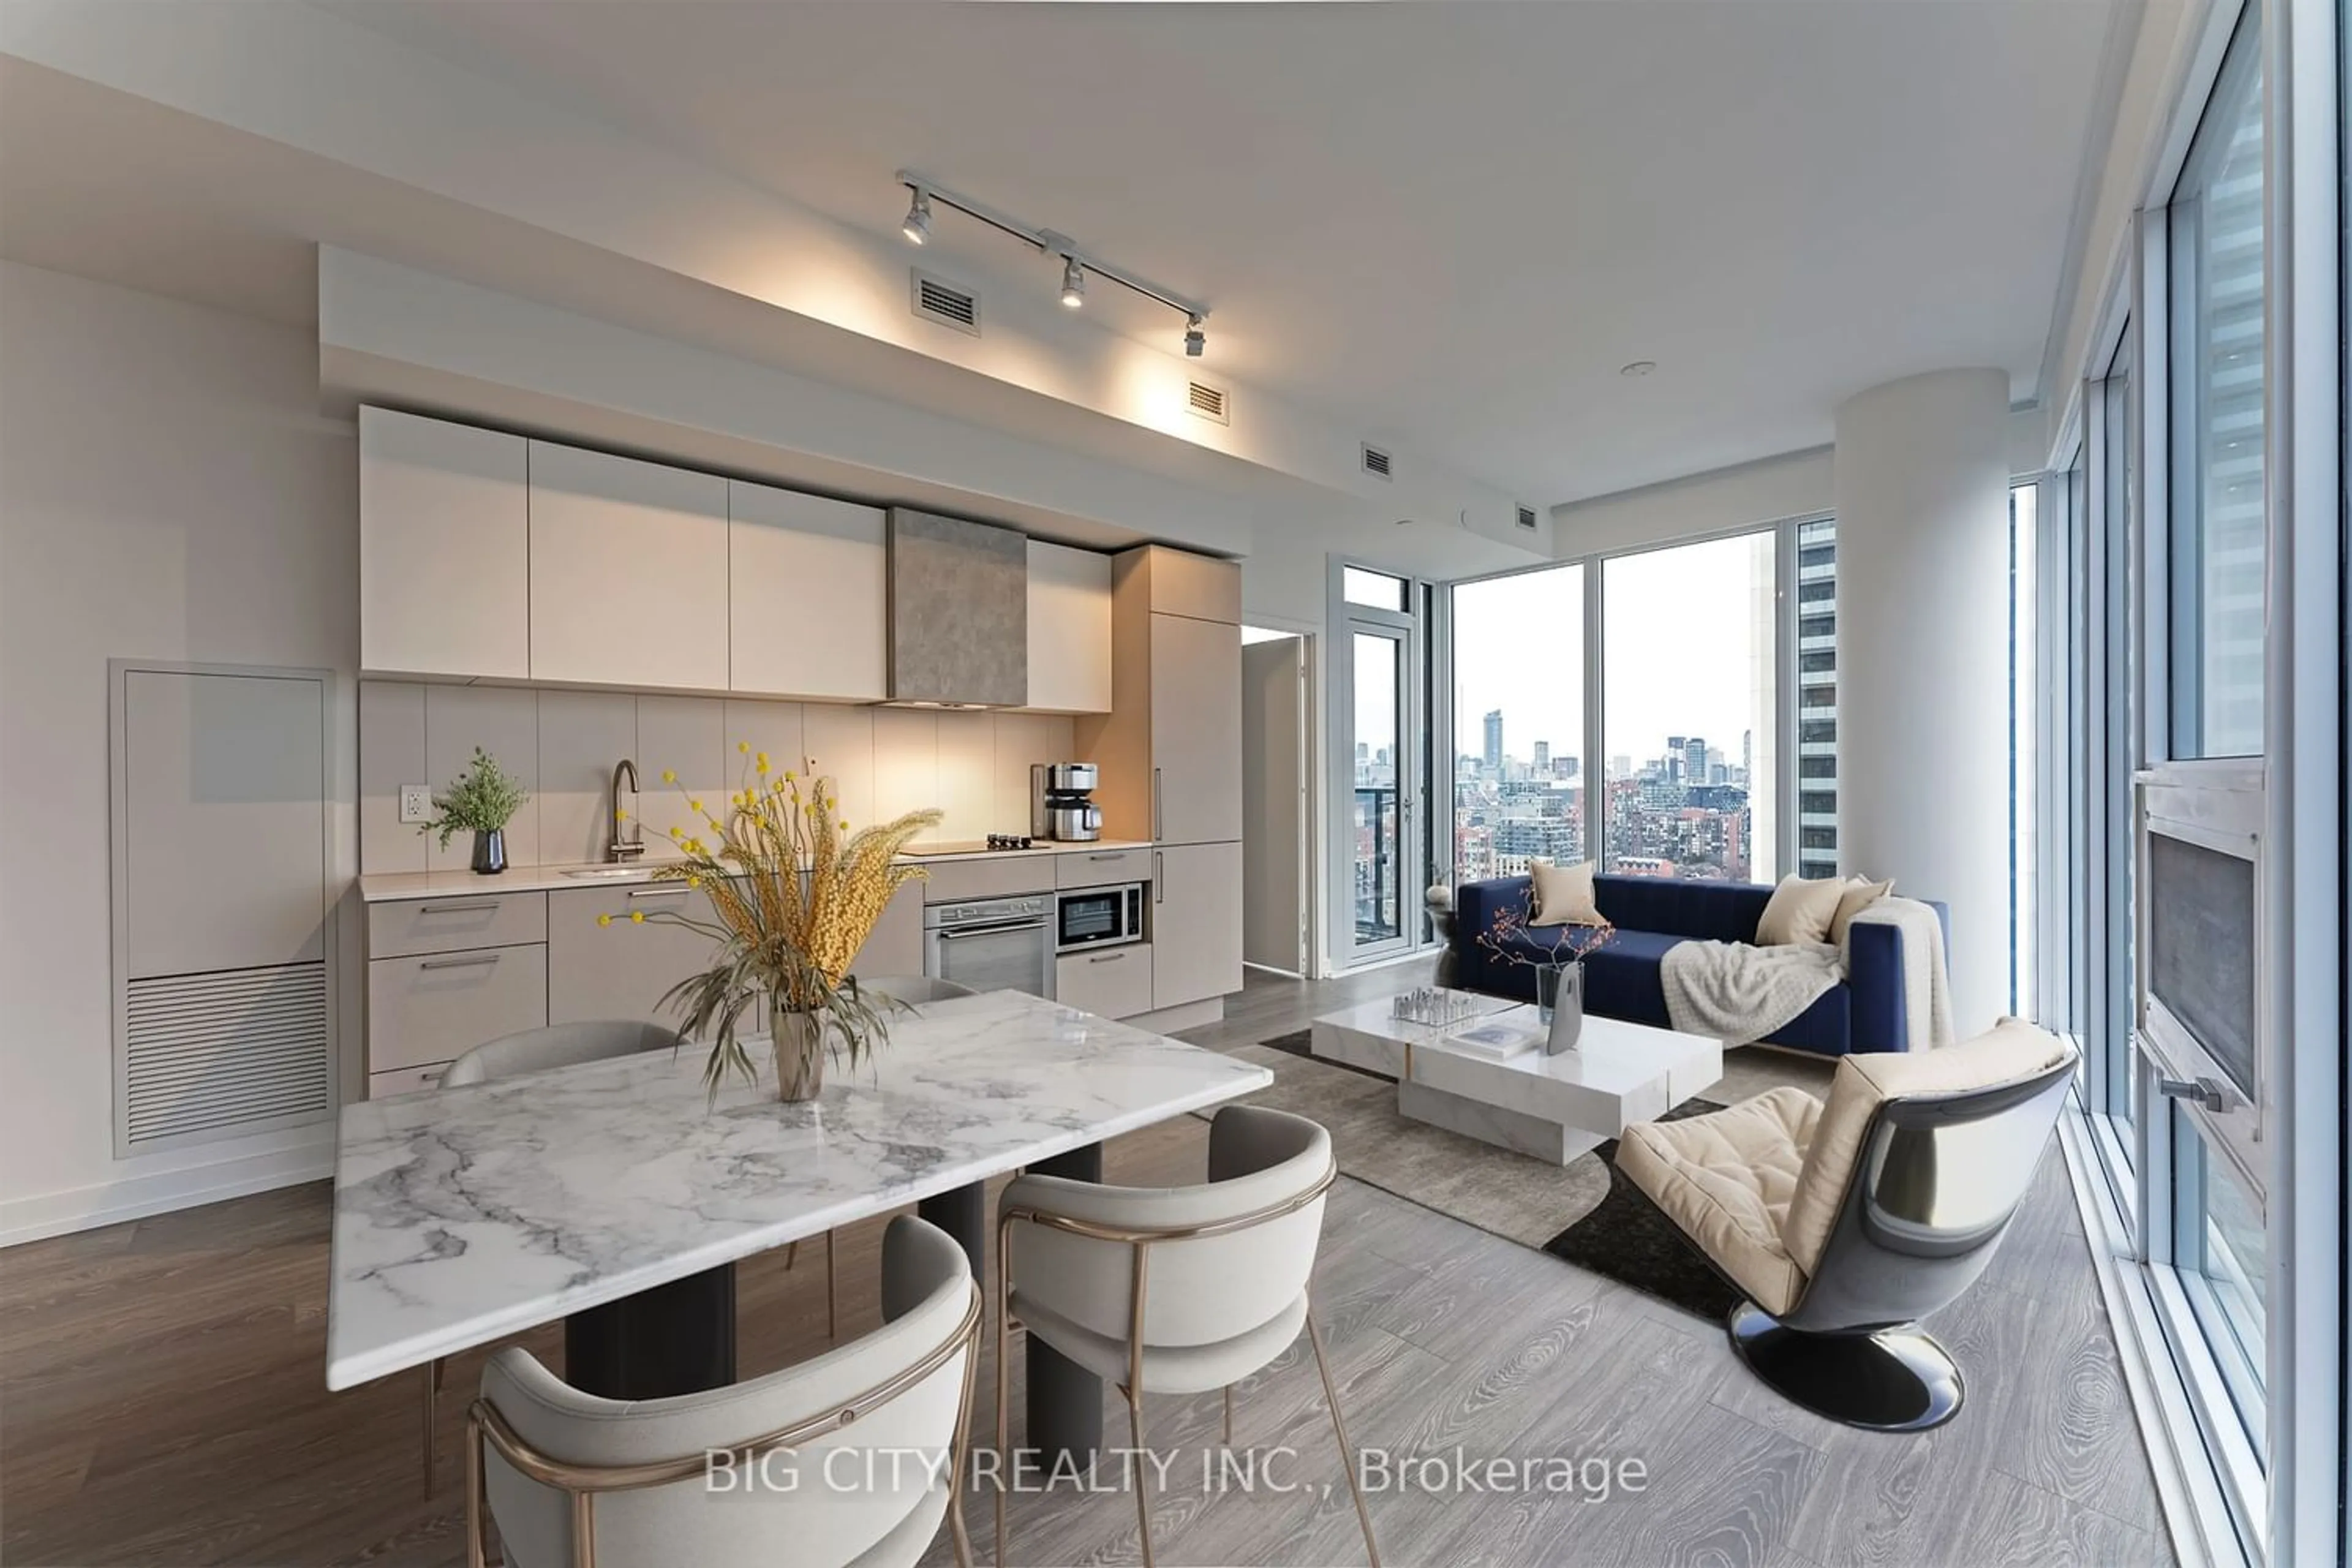 Contemporary kitchen for 19 Western Battery Rd #2306, Toronto Ontario M6K 3S4